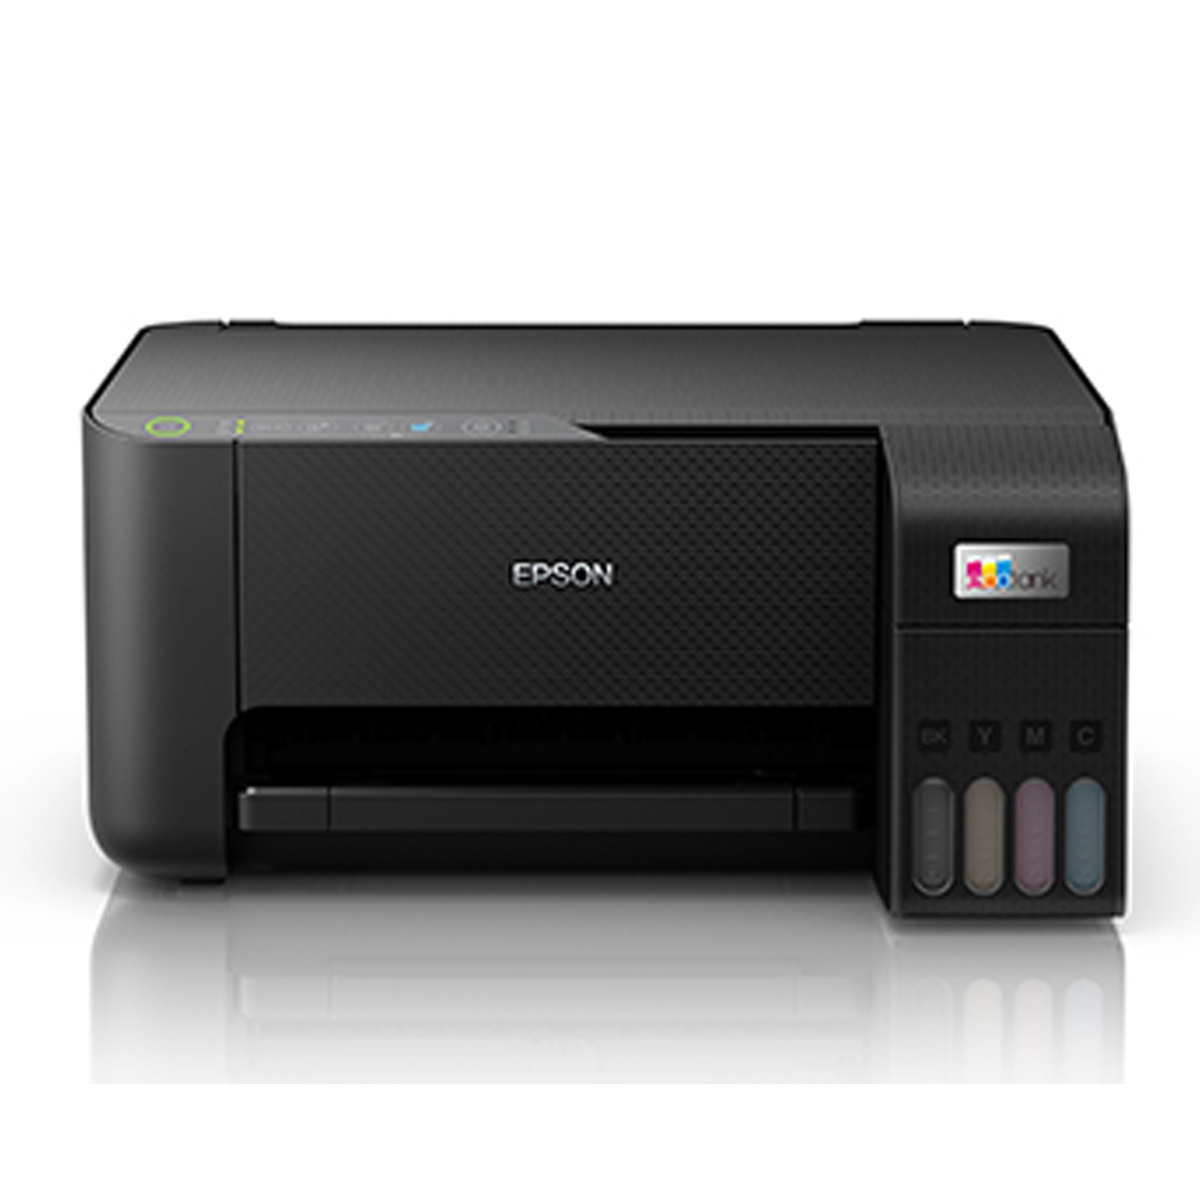 Epson EcoTank L3252 A4 Wi-Fi All-in-One Ink Tank Printer